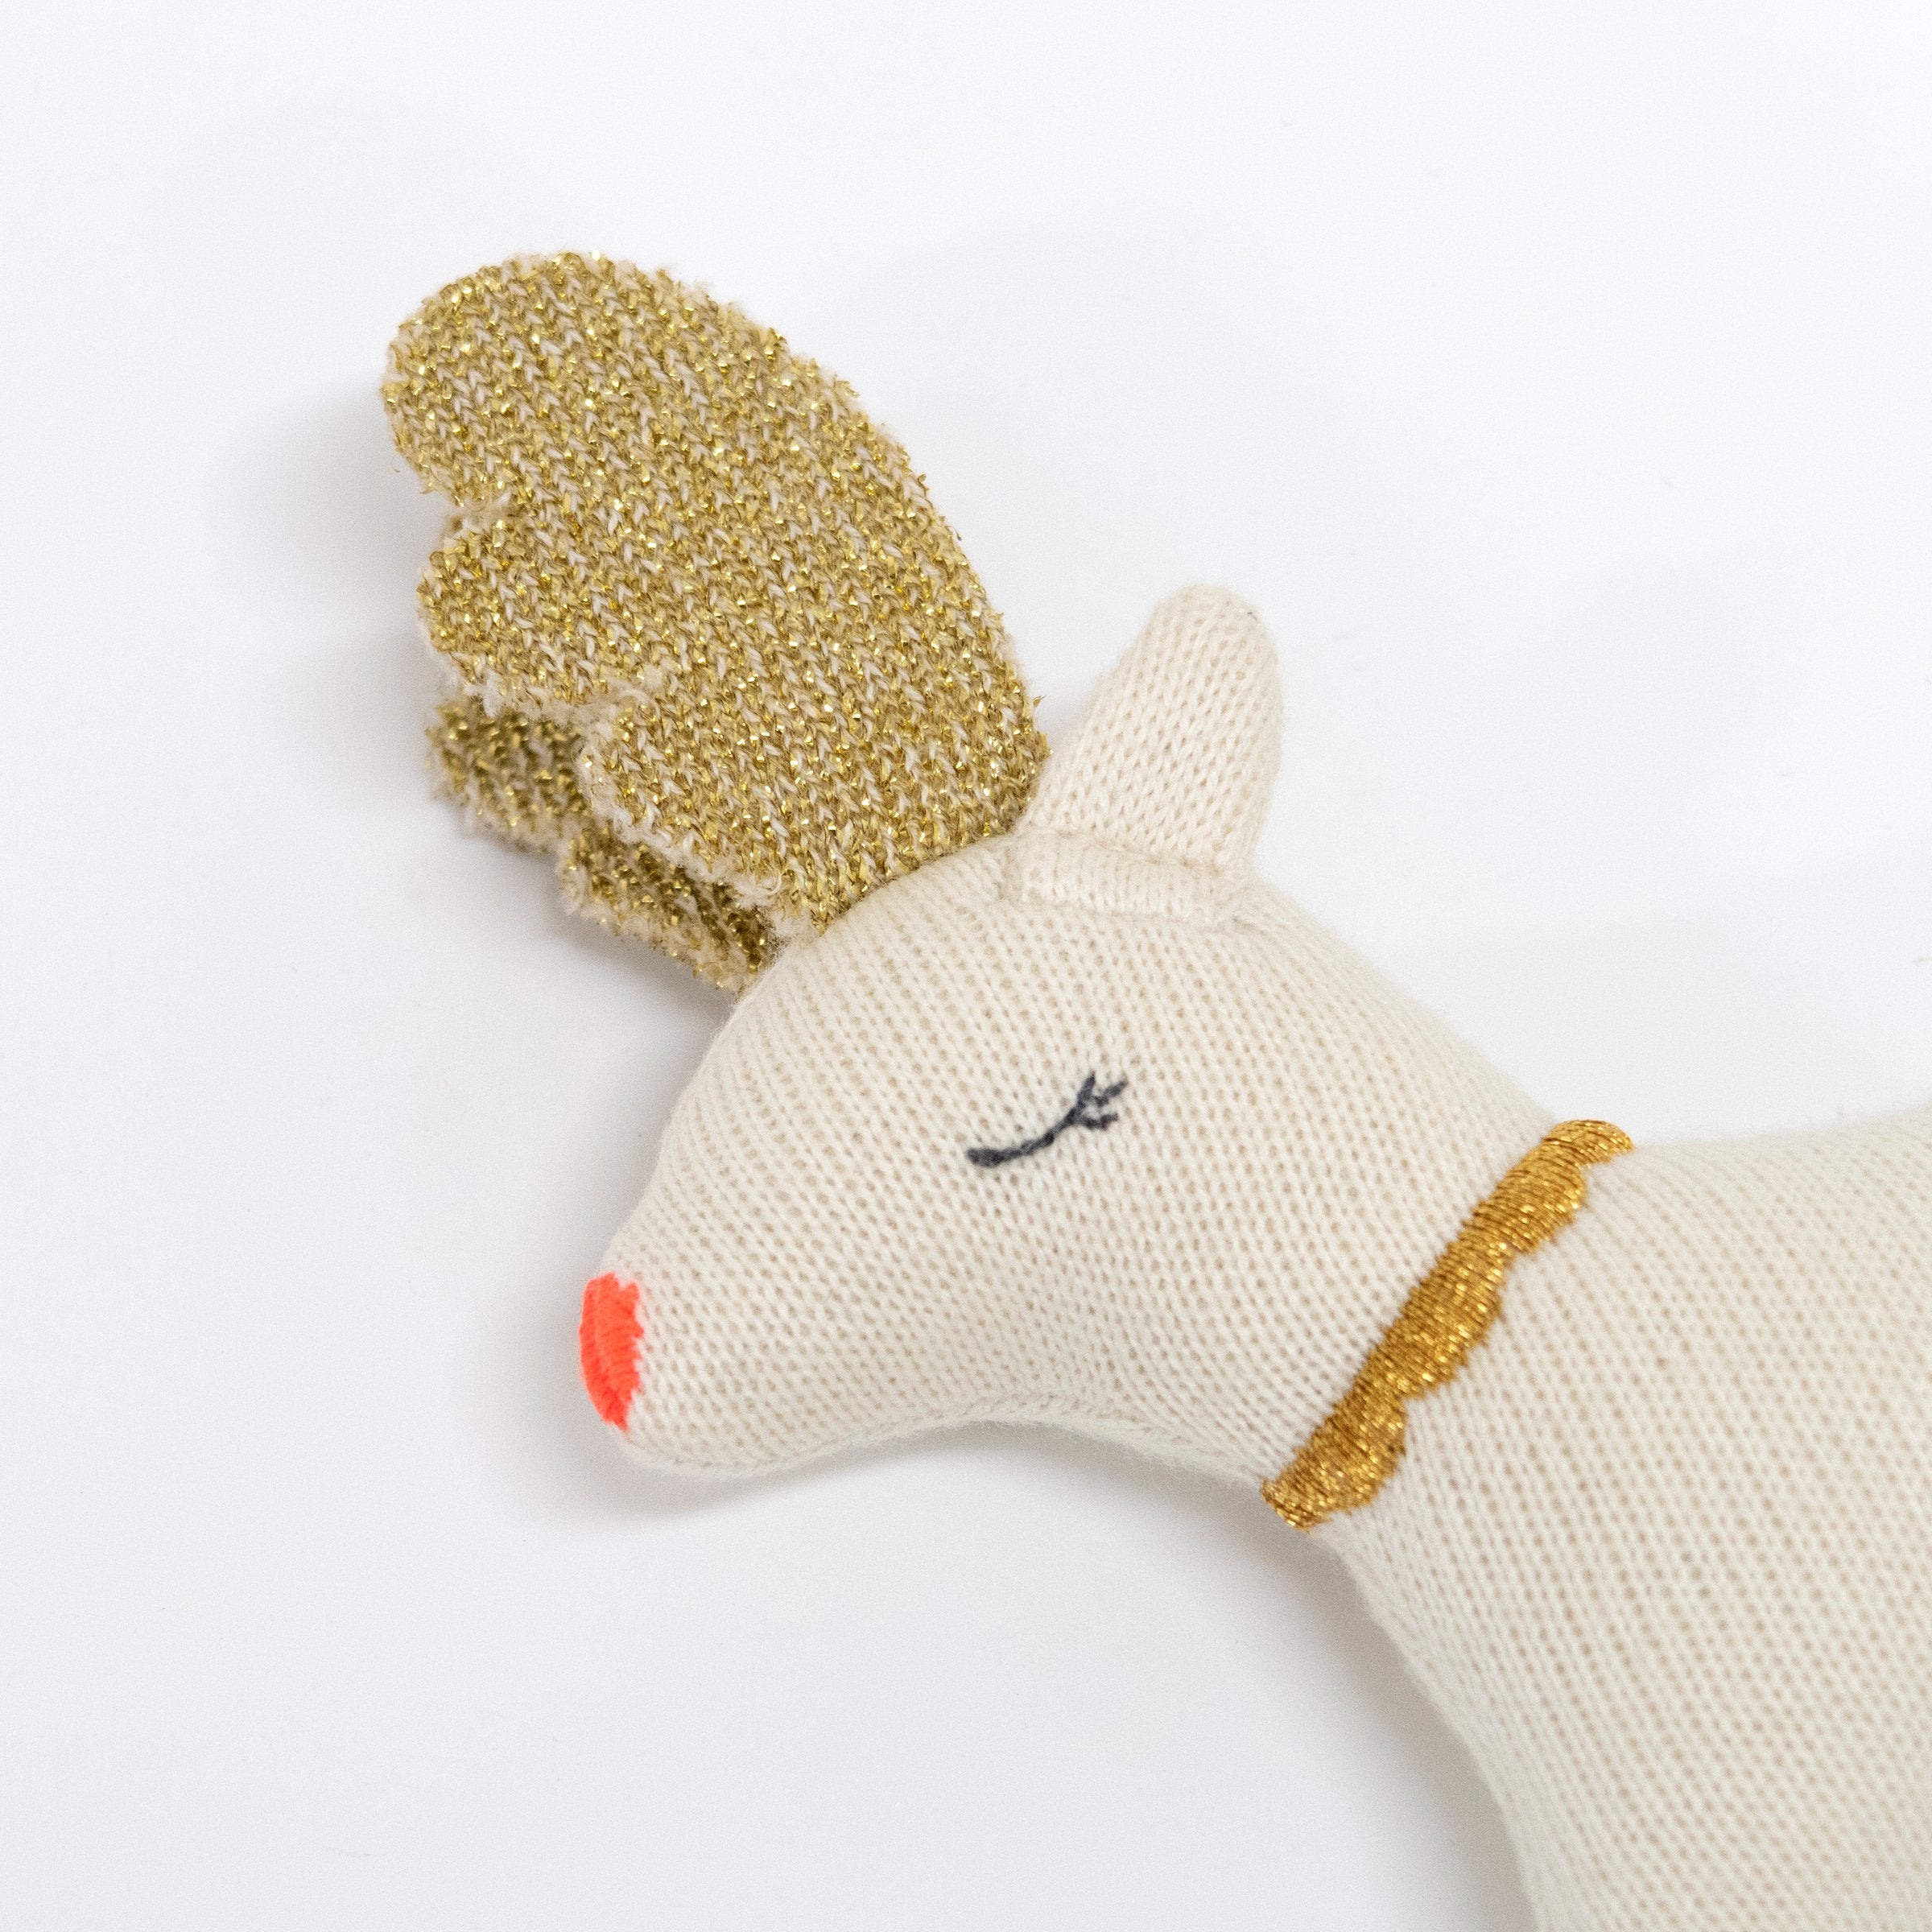 This adorable knitted organic cotton reindeer rattle is a fabulous Christmas baby gift.